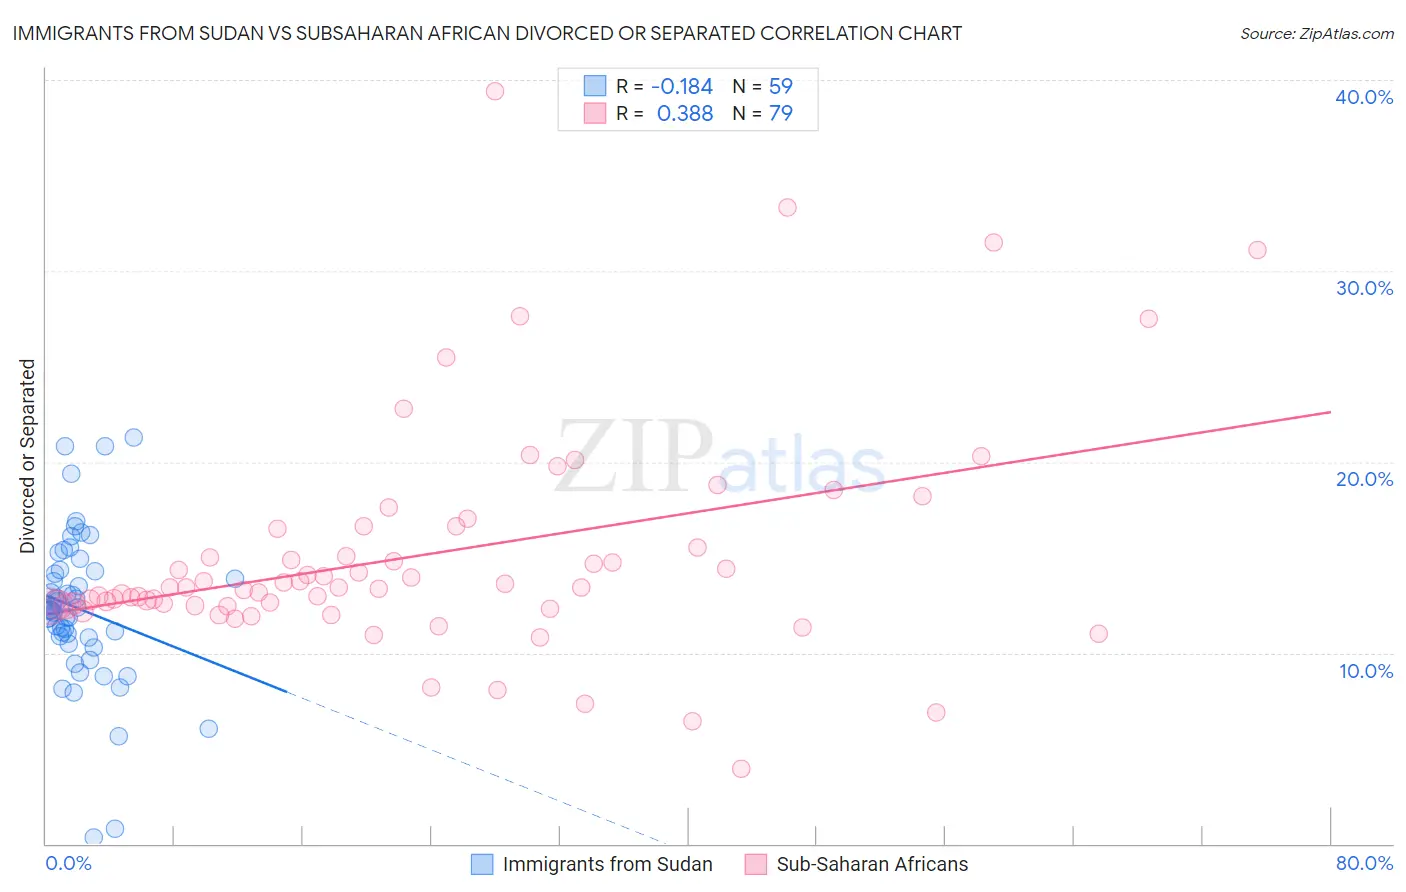 Immigrants from Sudan vs Subsaharan African Divorced or Separated